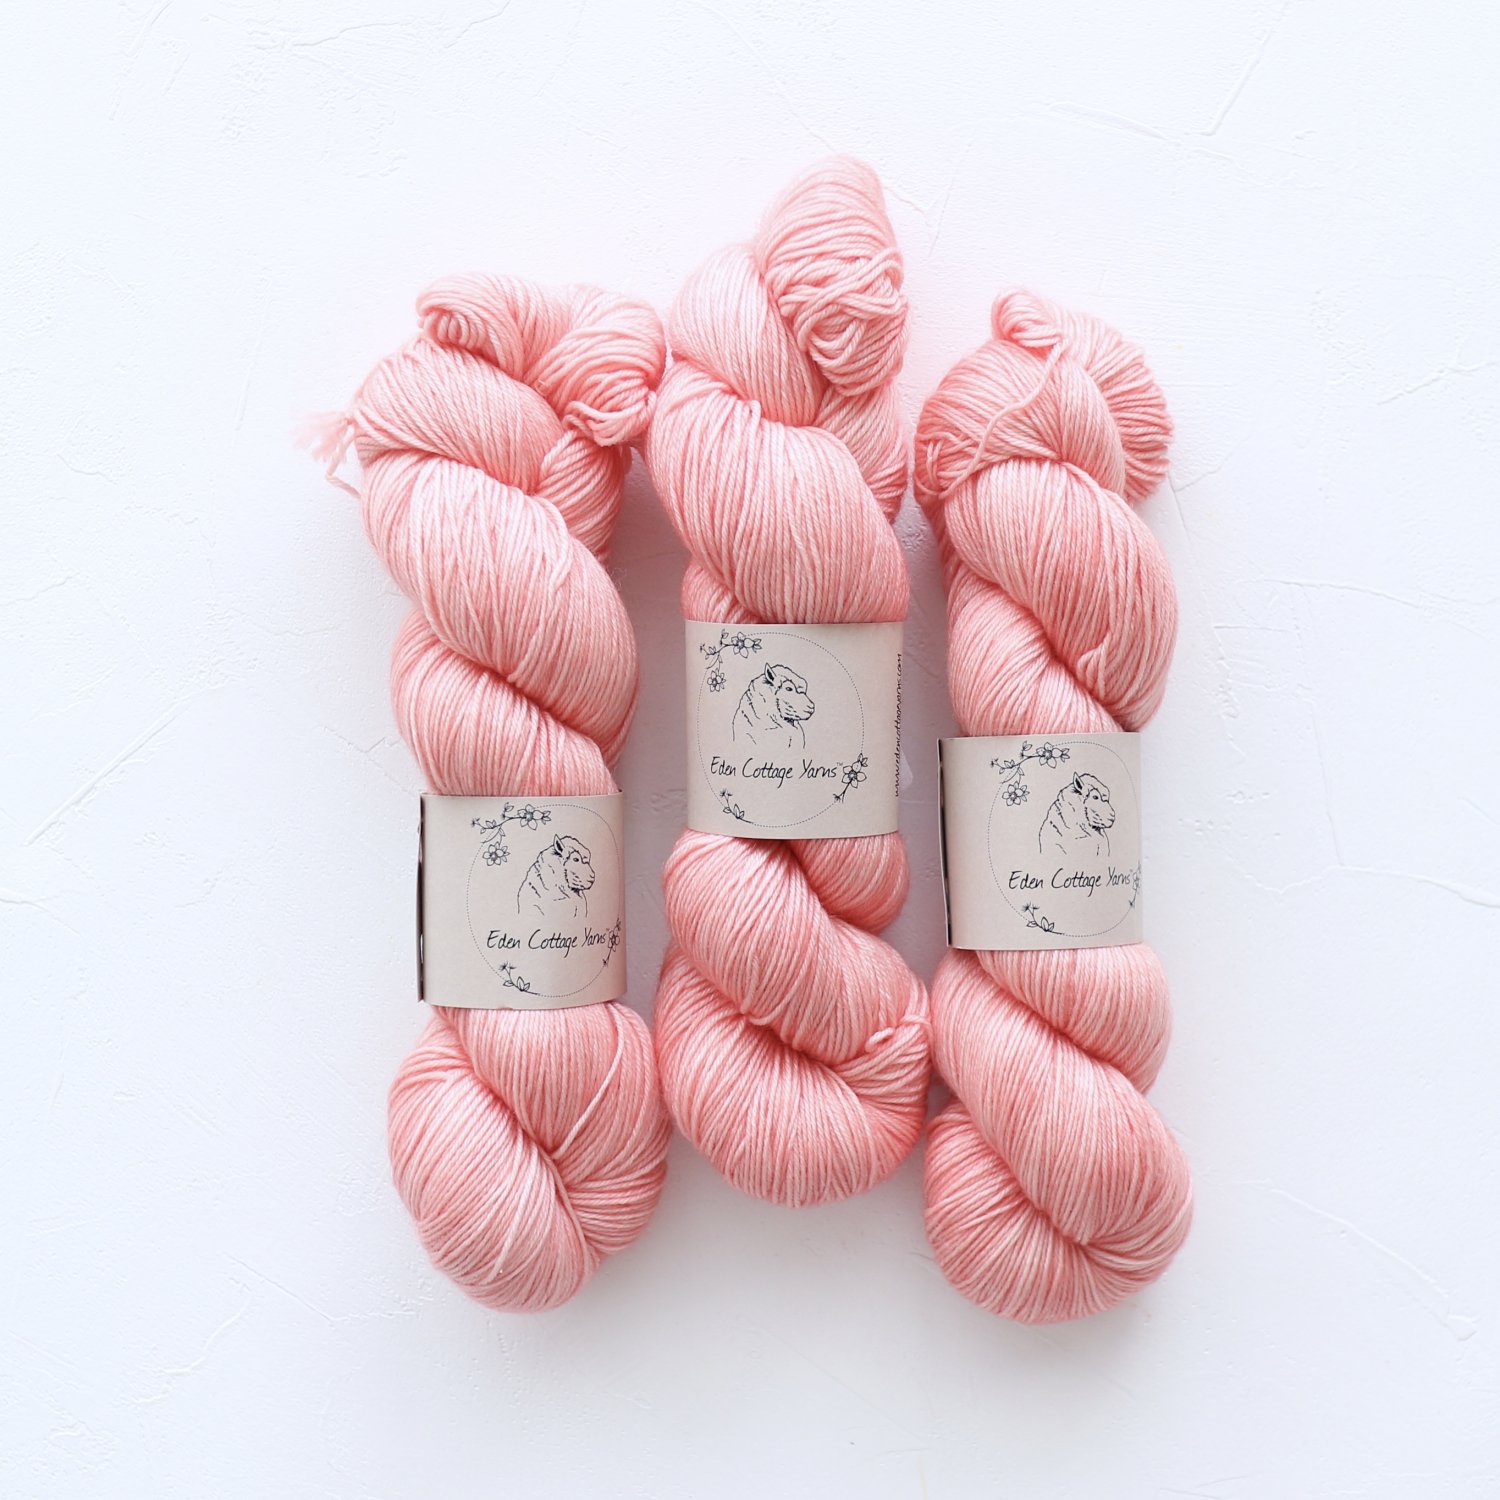 【Eden Cottage Yarns】<br>Pendle 4ply<br>Apricot Tulip